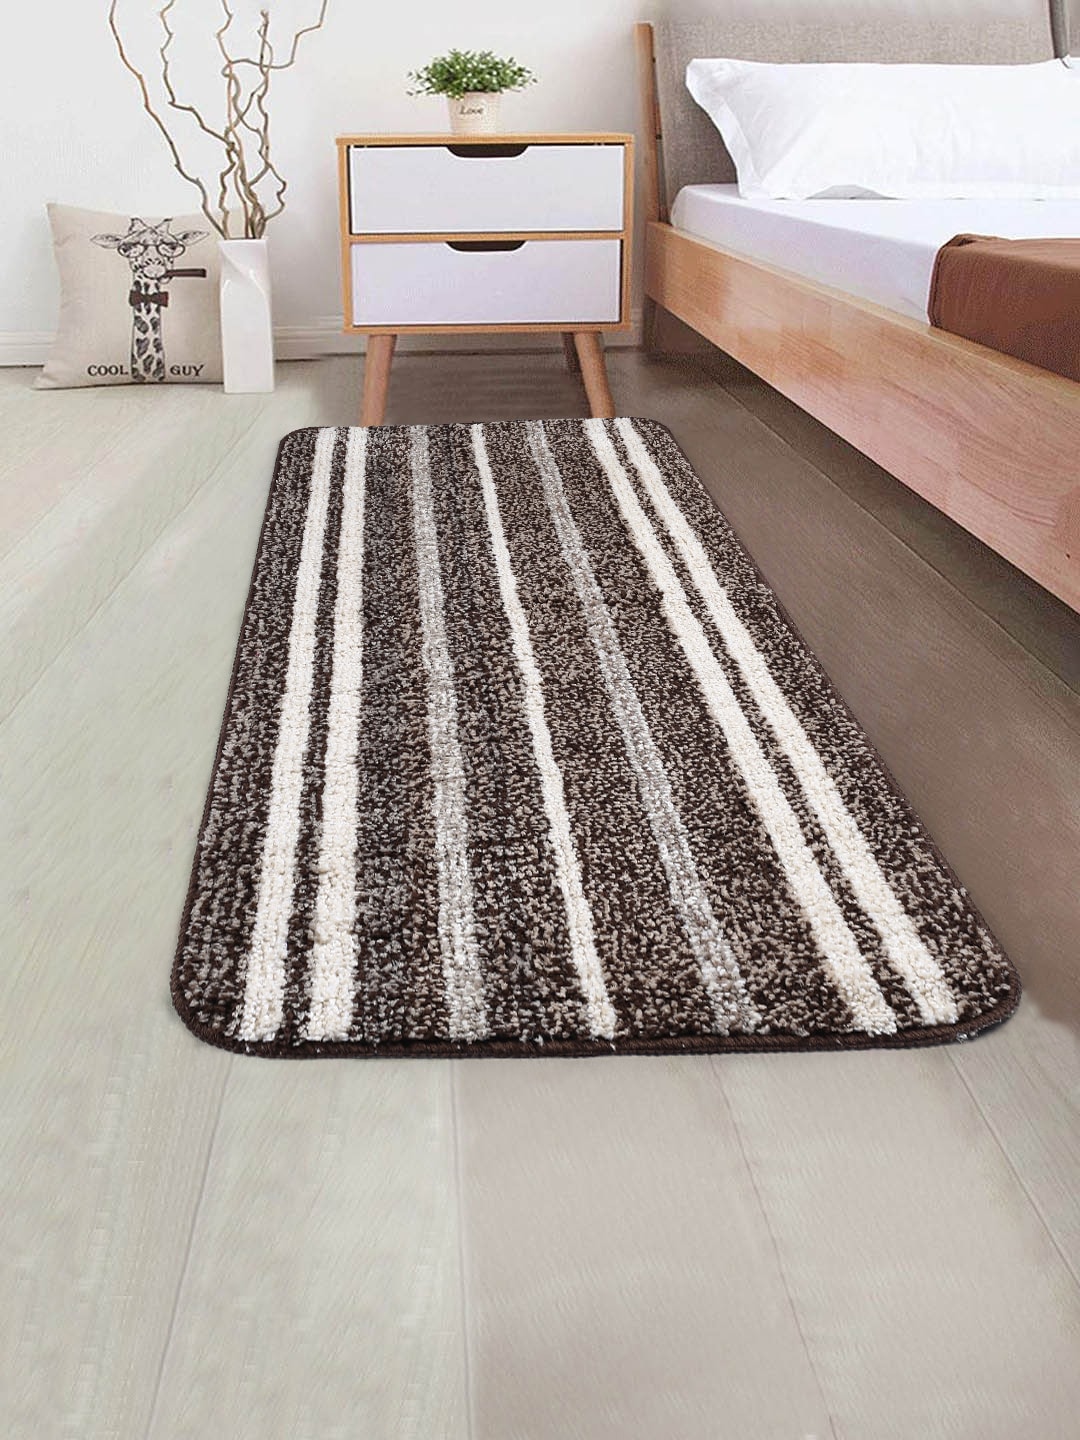 Saral Home Brown & White Striped Anti-Skid Floor Runner Price in India